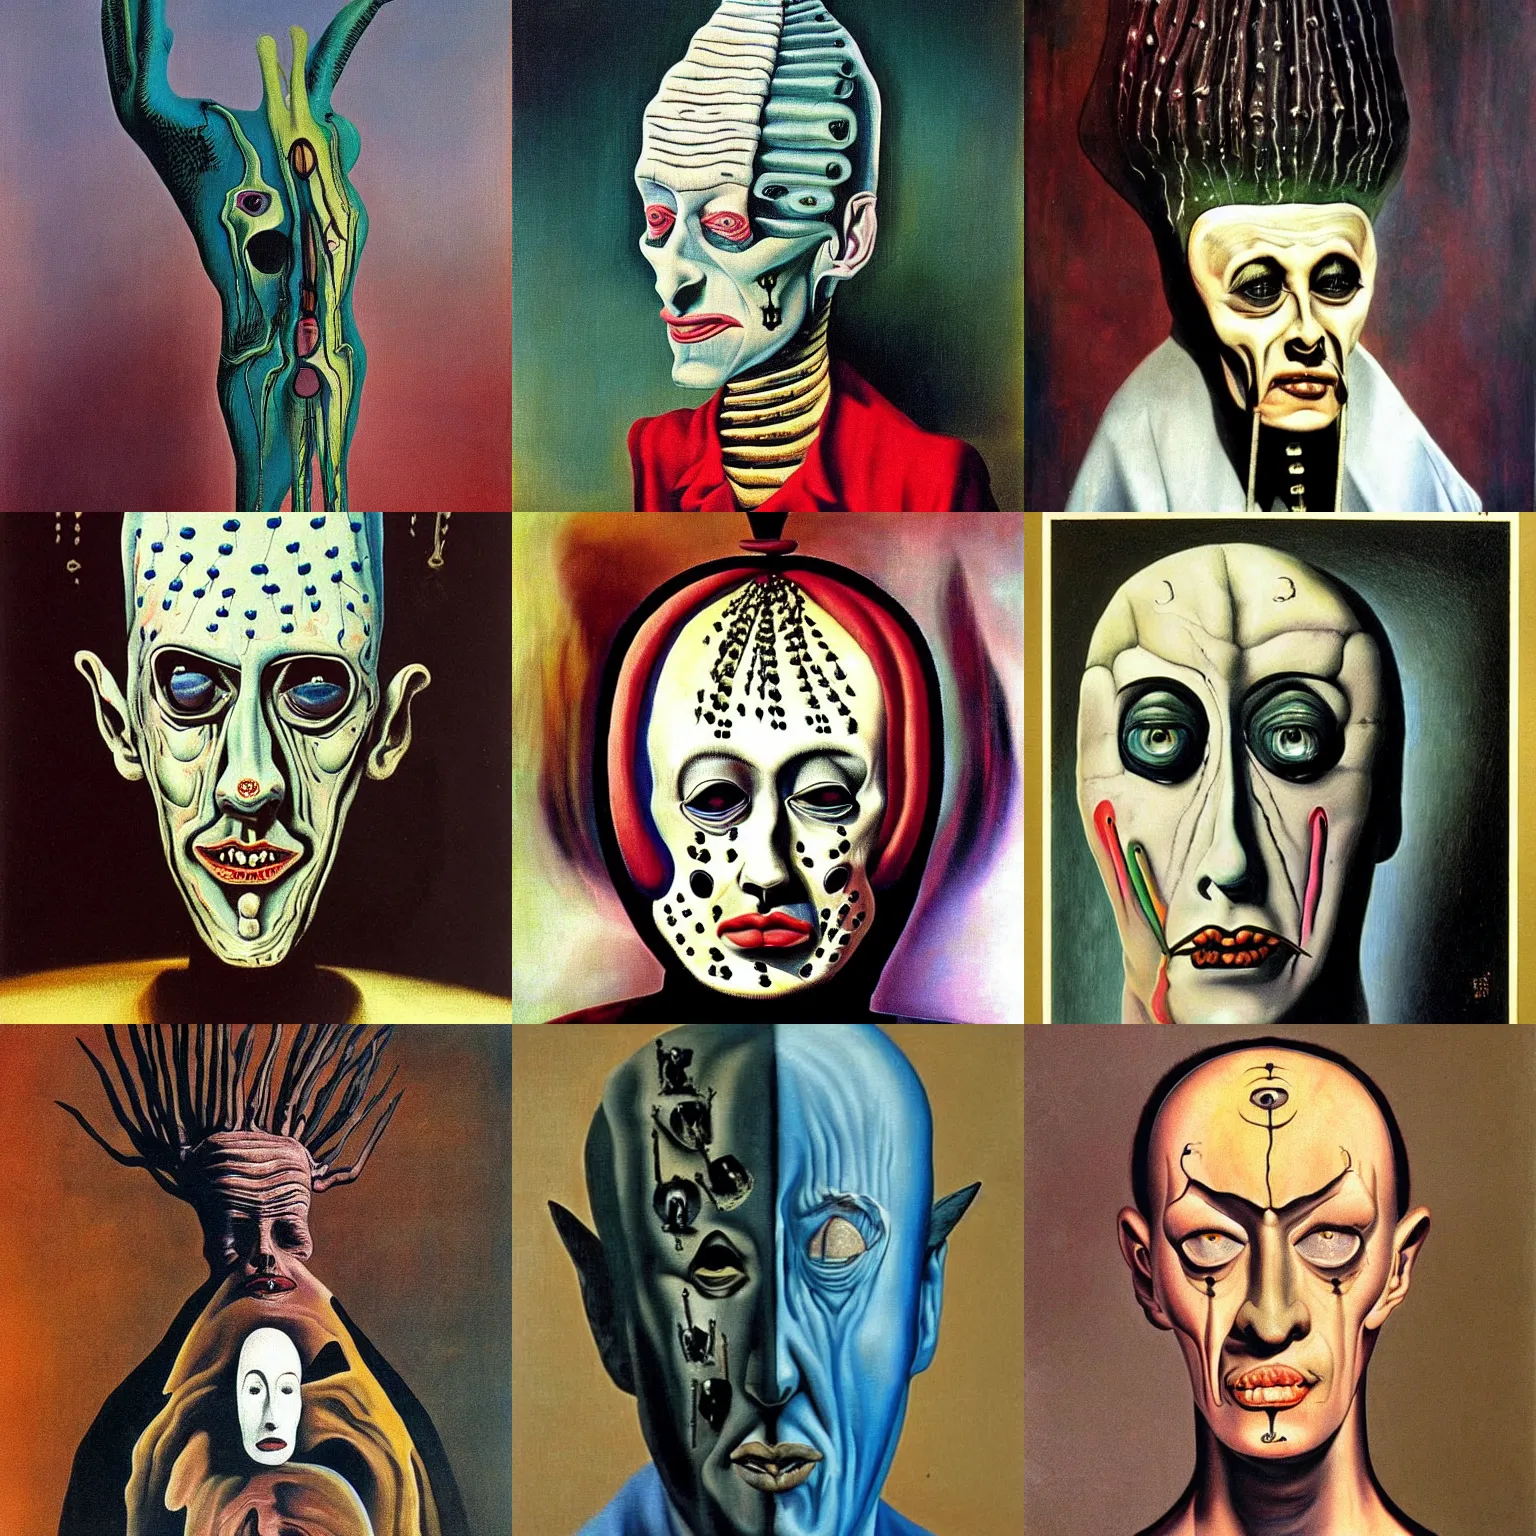 Prompt: pinhead painted by salvador dali